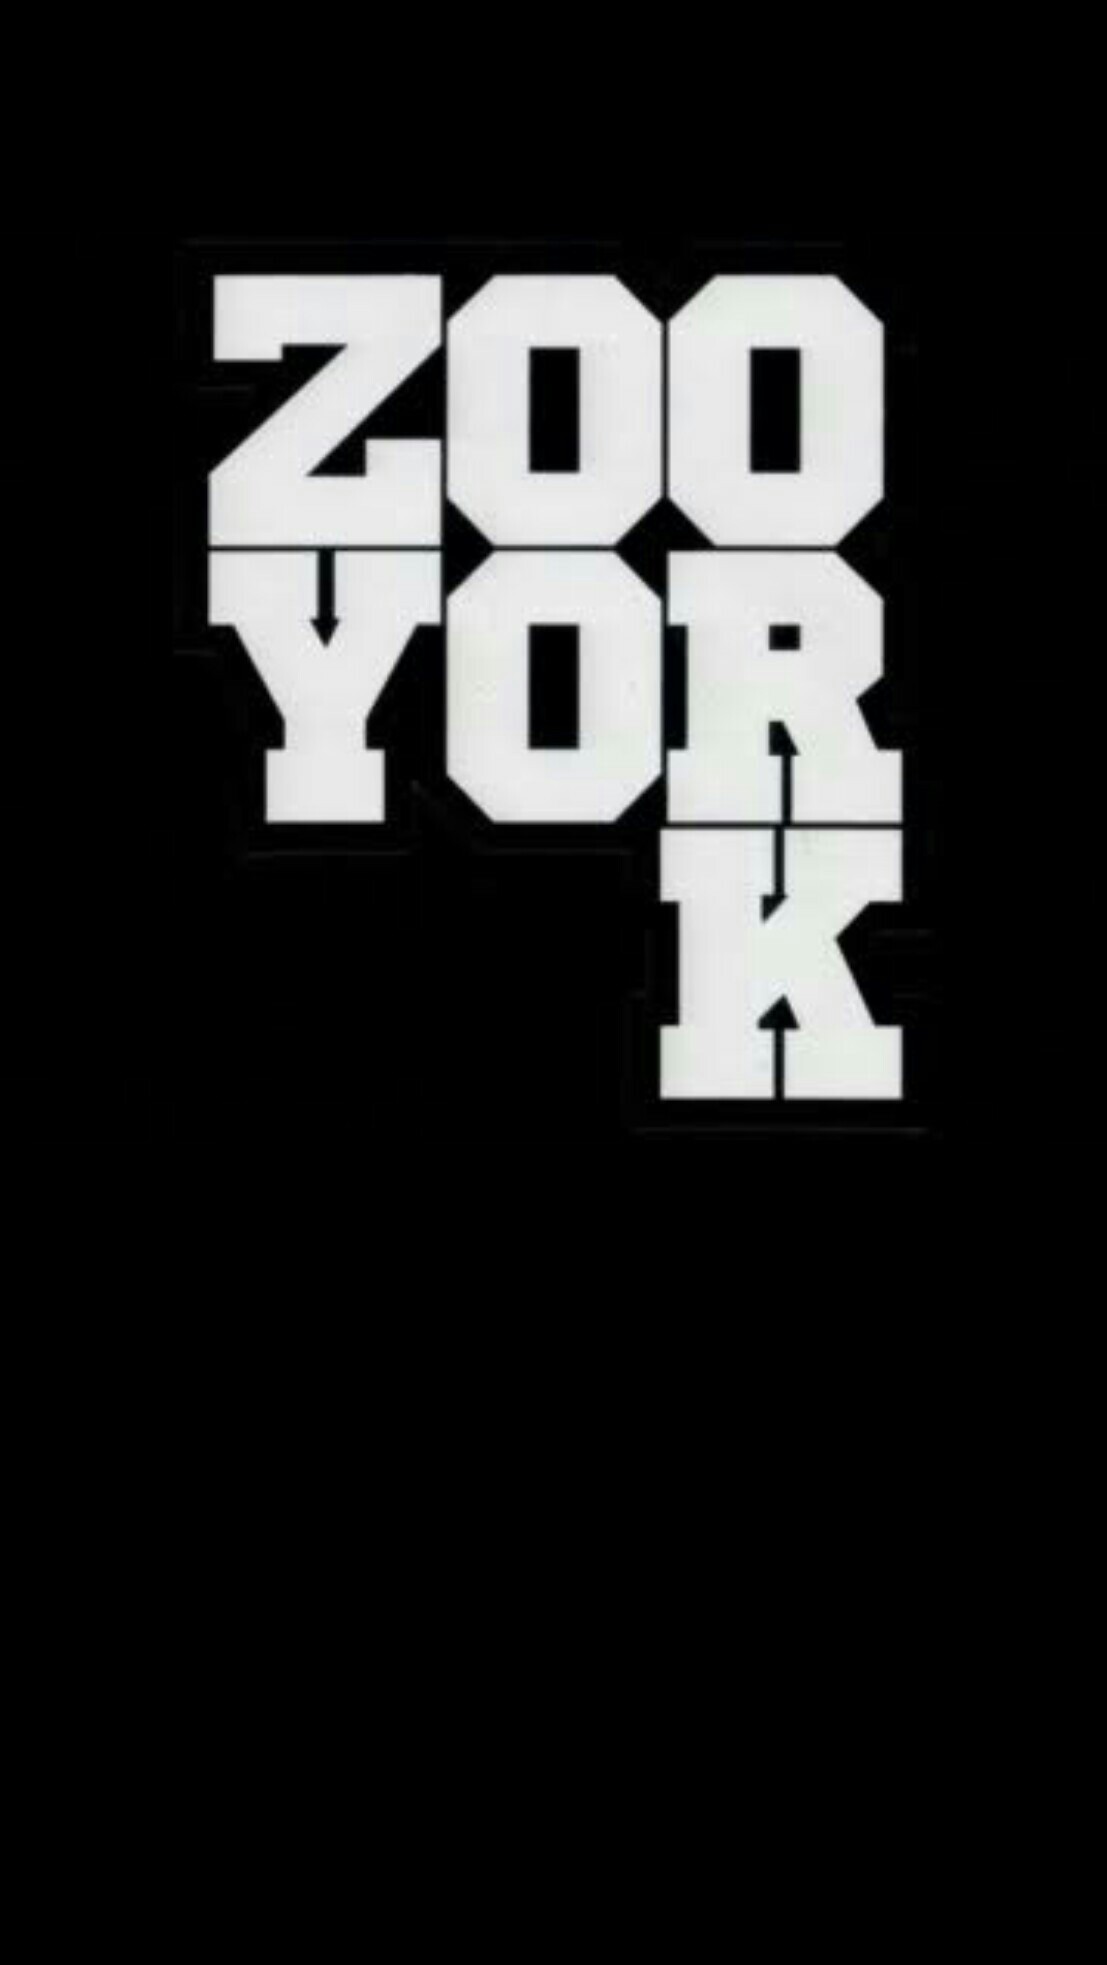  Zoo  York Wallpapers  53 pictures 